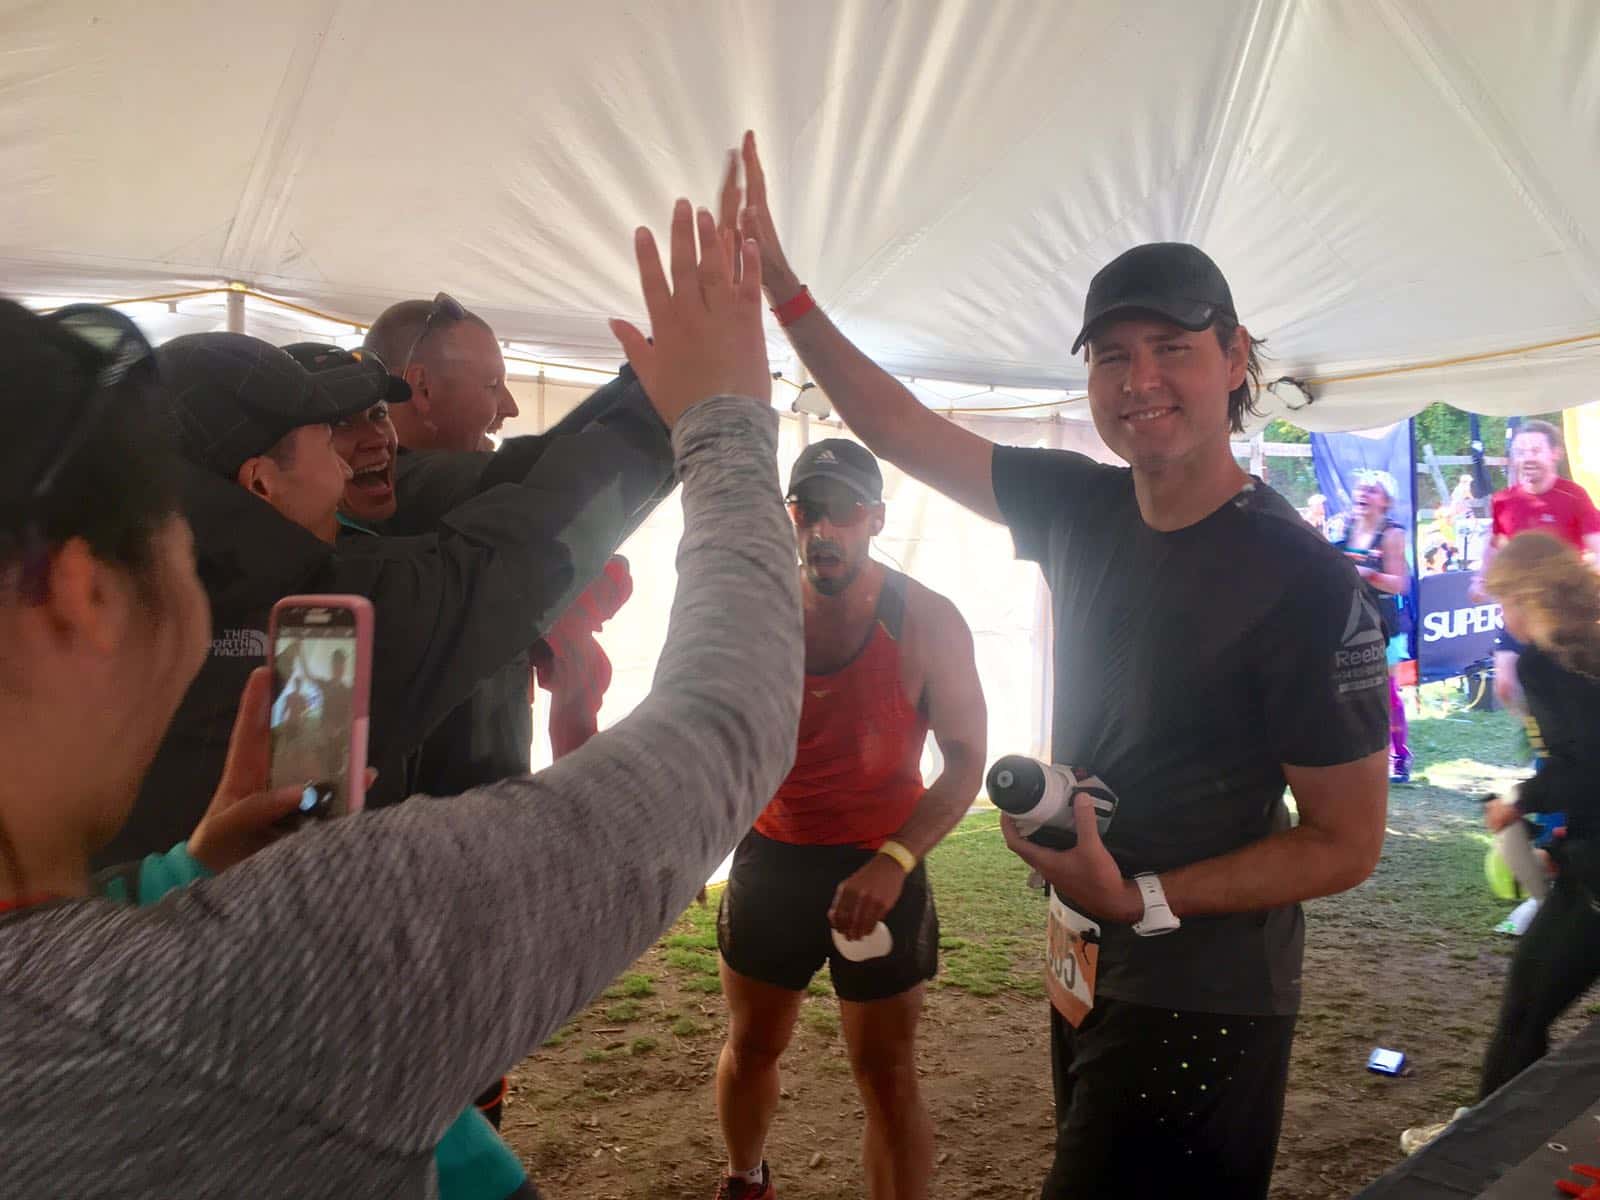 RACE REPORT: Cottage Country Ragnar Trail Relay Sept 8-9